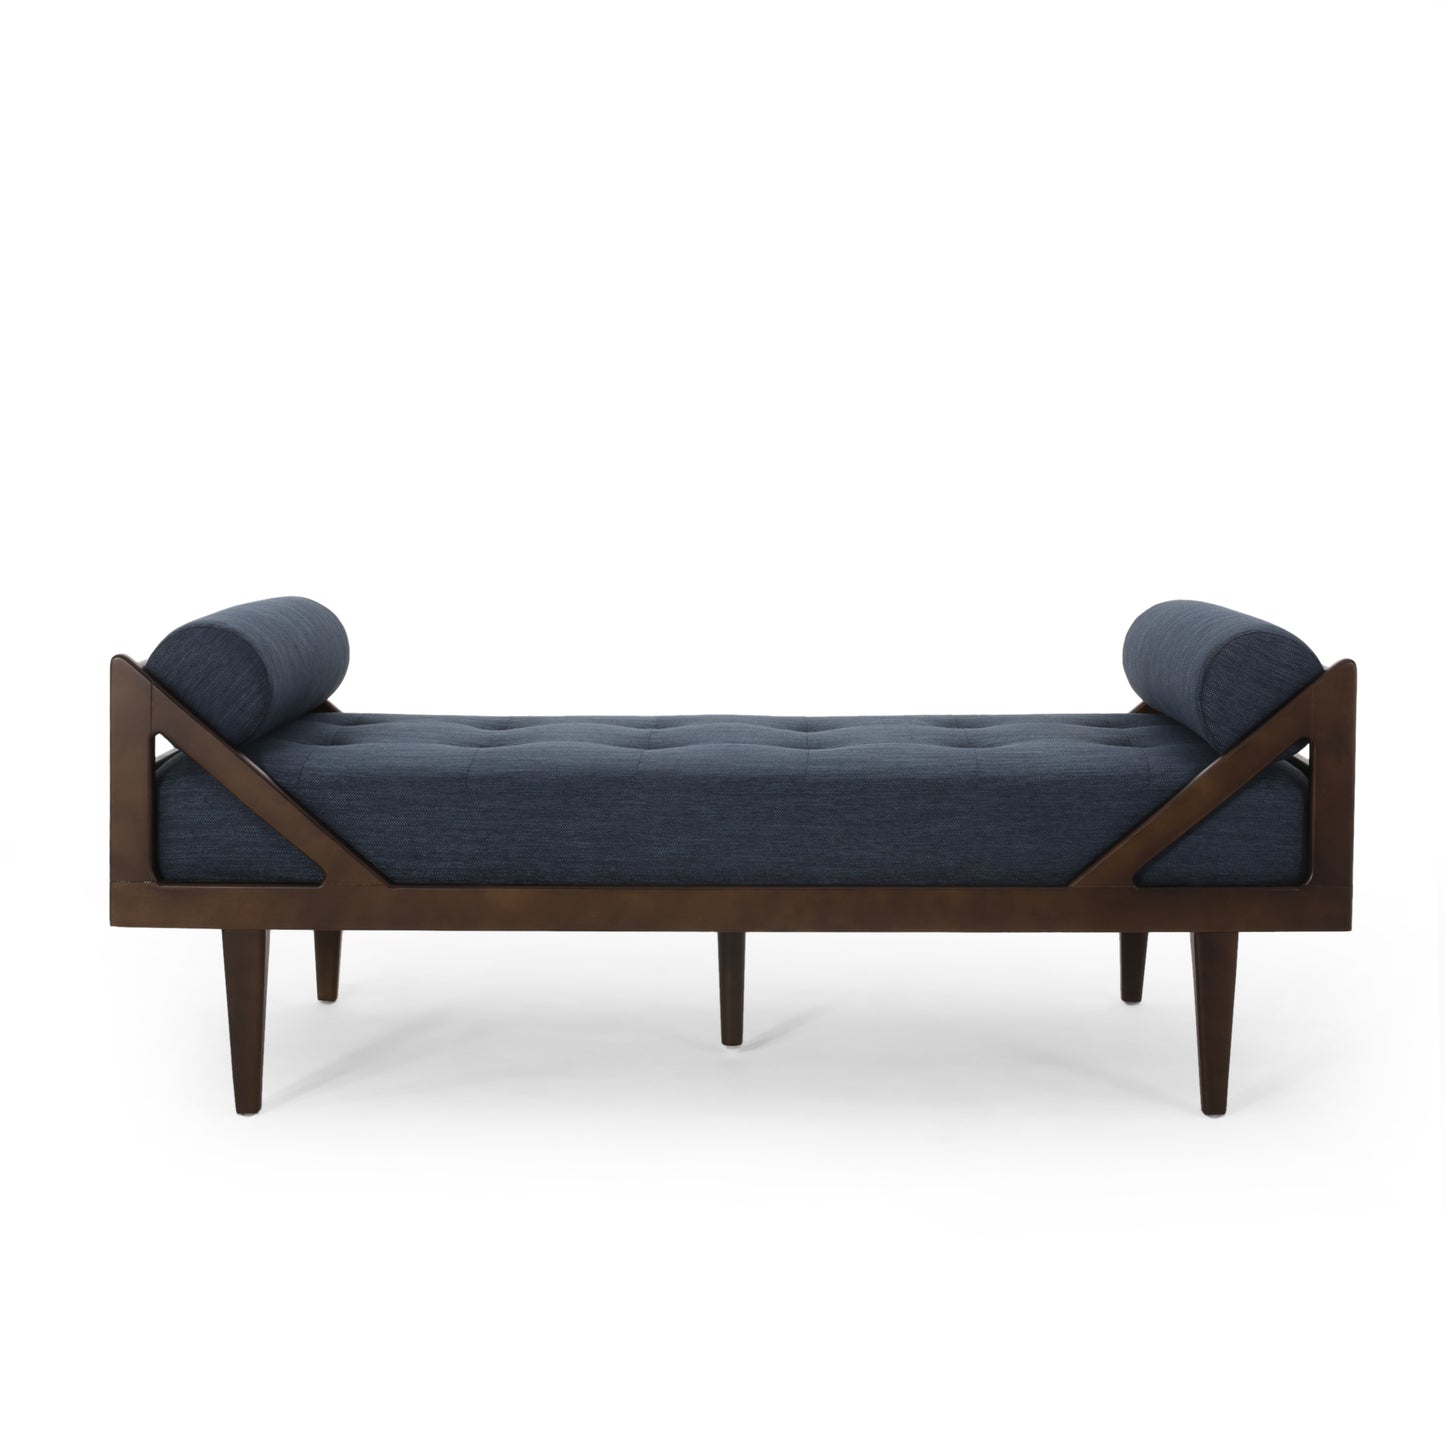 Sumner Contemporary Tufted Chaise Lounge with Rolled Accent Pillows